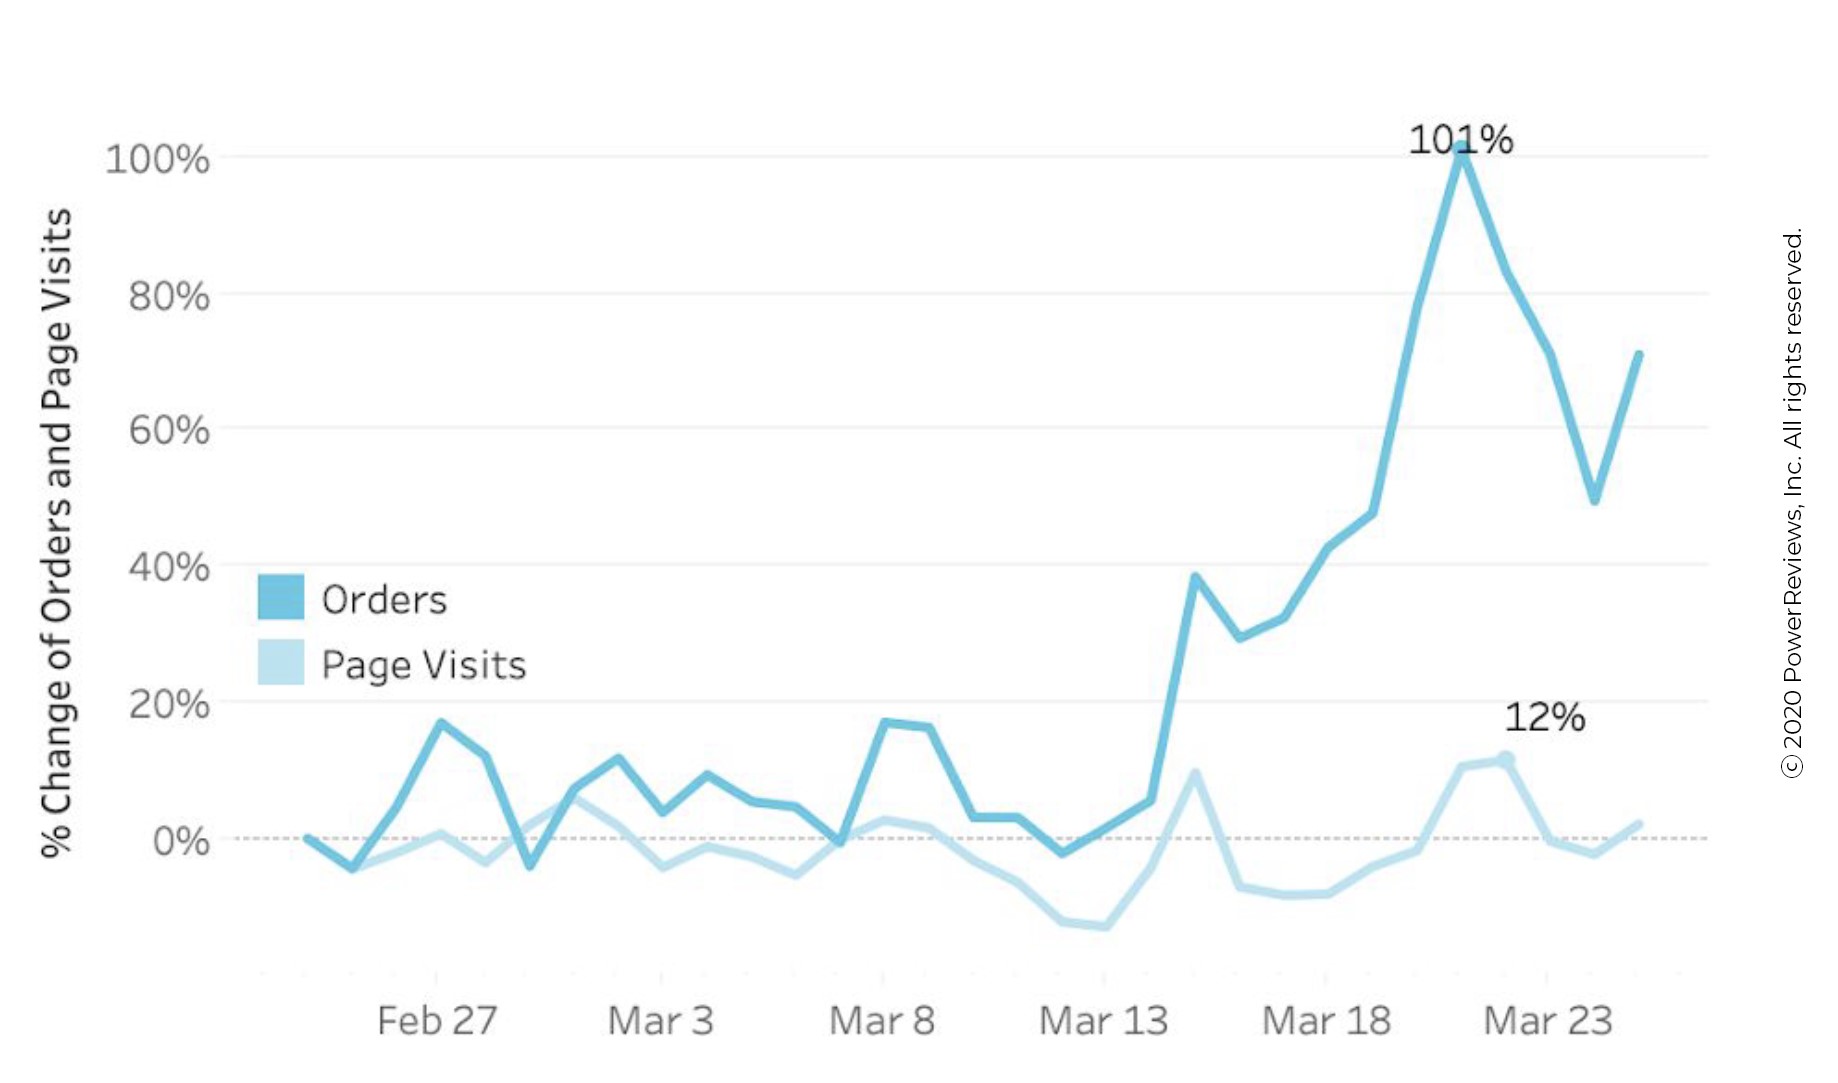 Traffic steady but conversions skyrocket